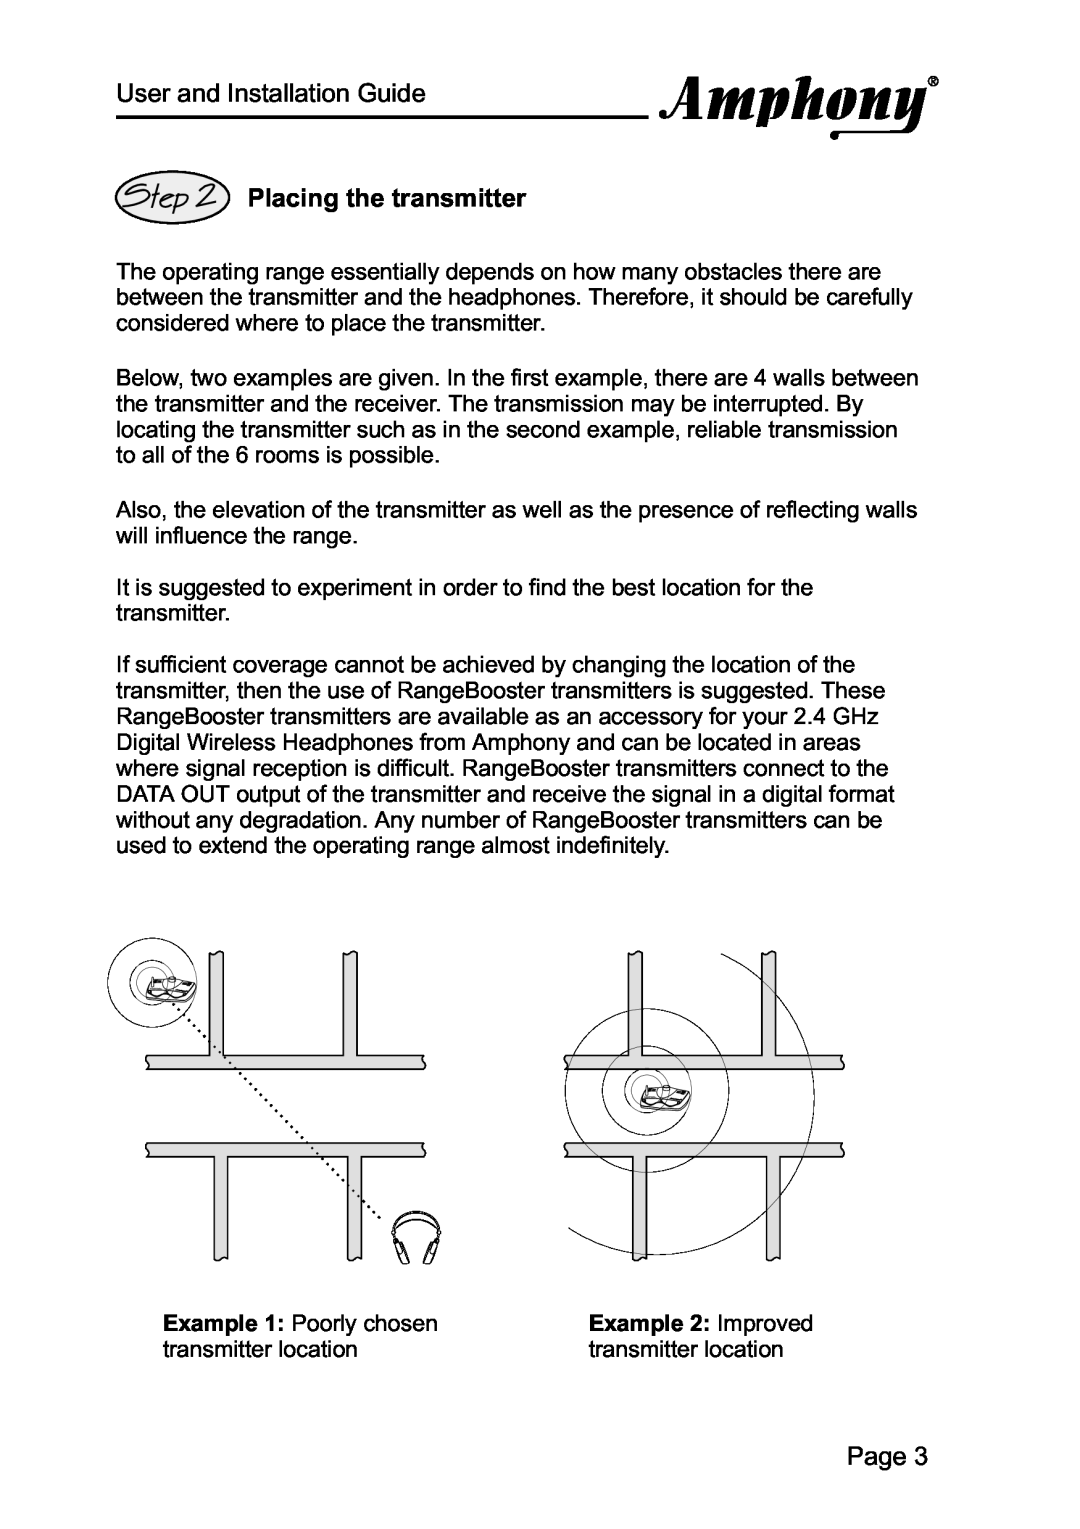 Amphony 2000 manual Placing the transmitter, Example 2 Improved, User and Installation Guide, Page 